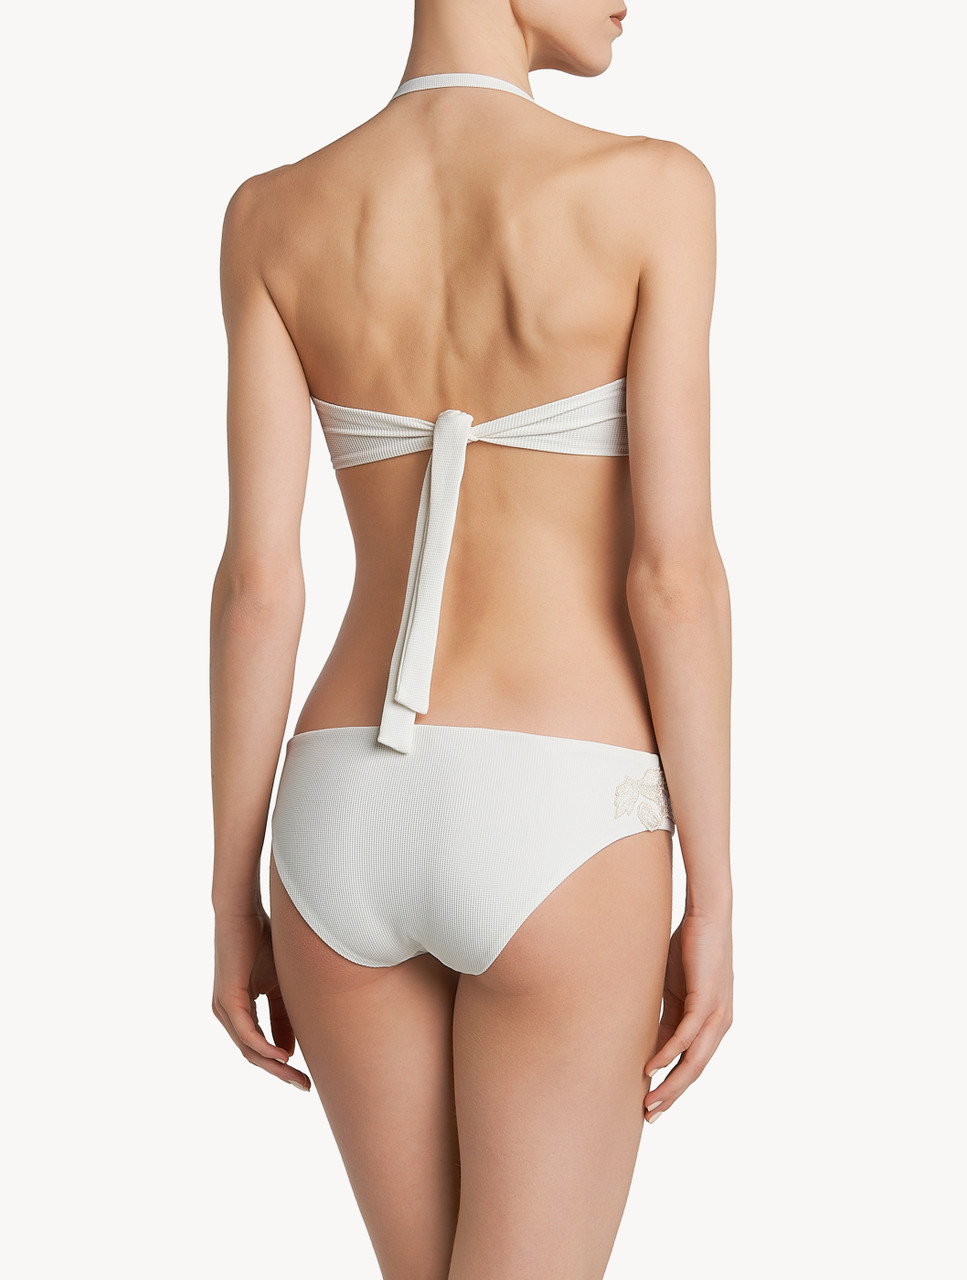 Low-rise Bikini Briefs in off-white with ivory embroidery - La